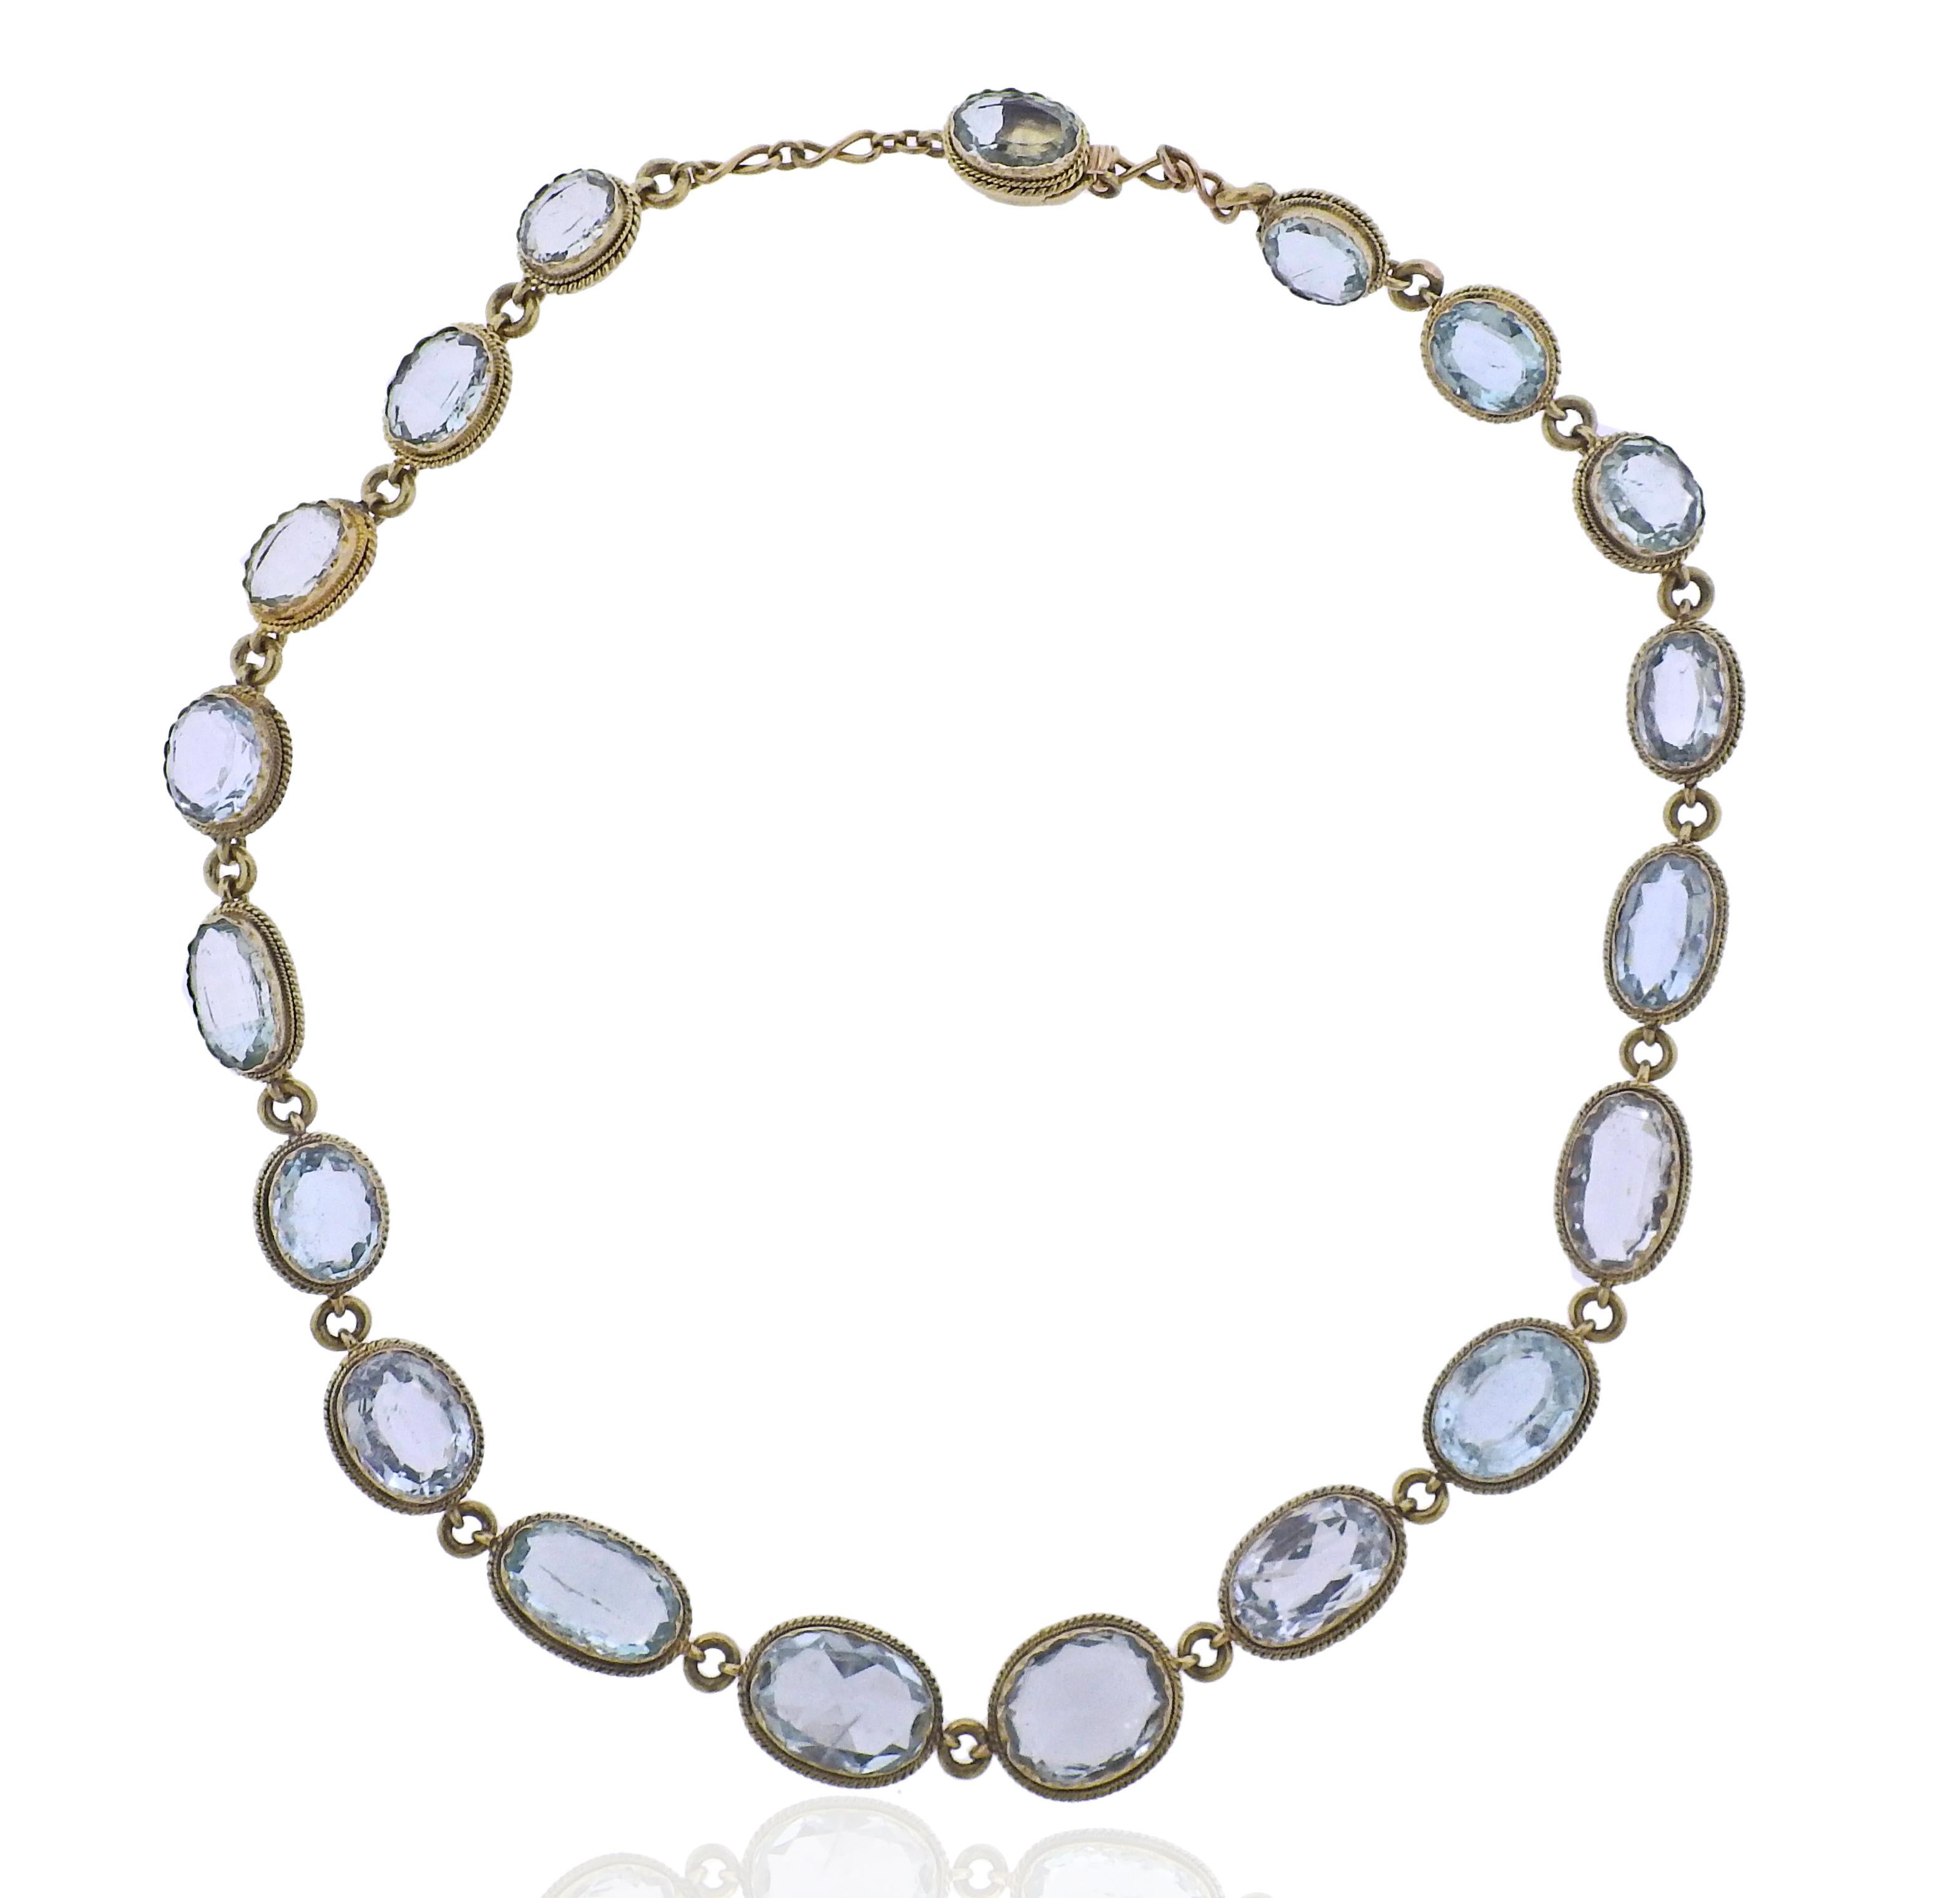 14k gold vintage necklace with aquamarines. Necklace is 15.75